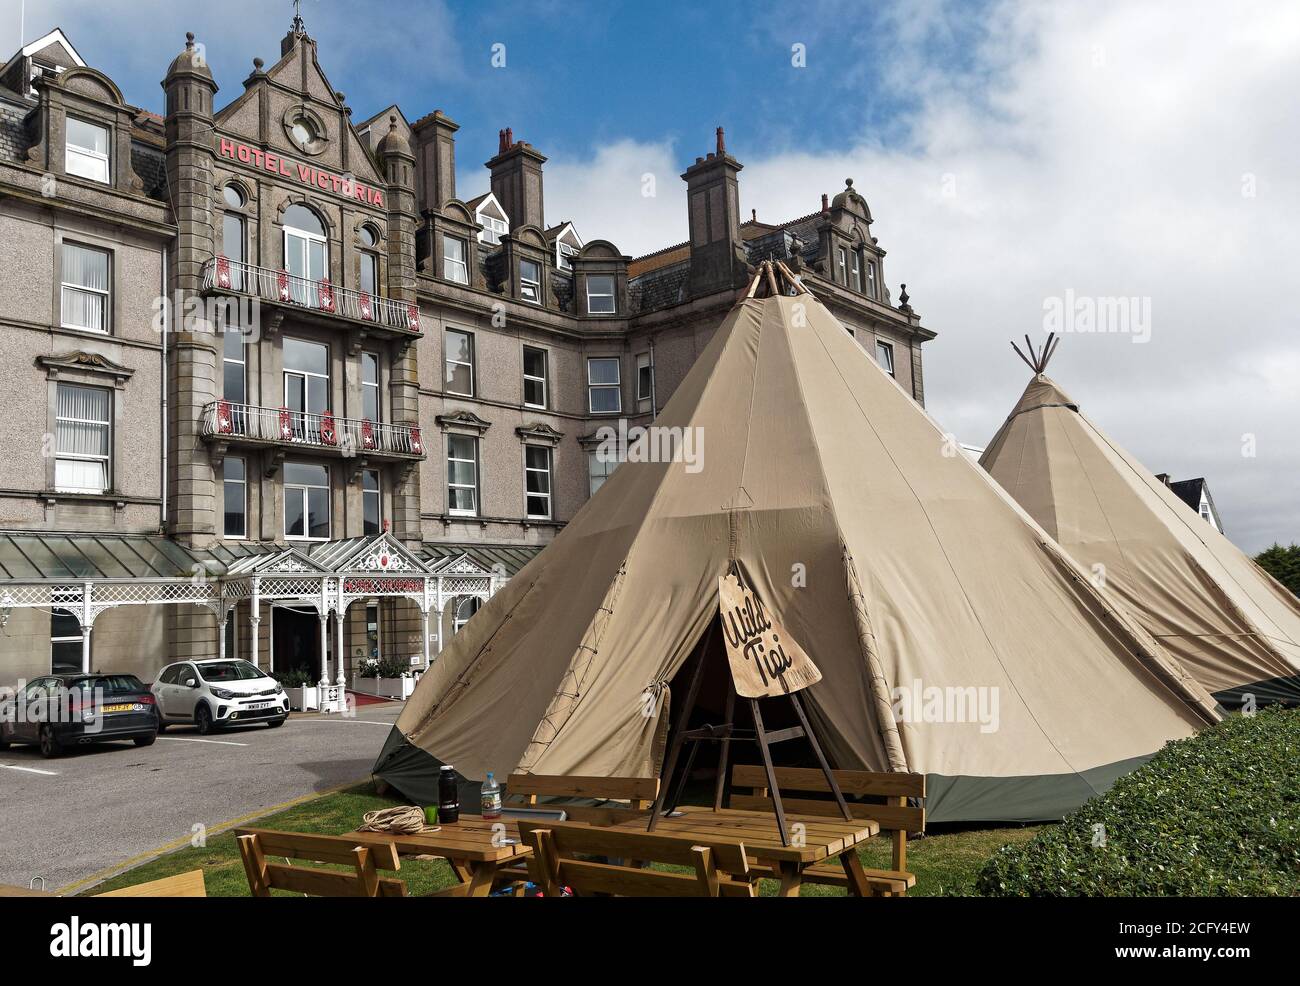 UK Weather, 08th September 2020. UK Newquay Cornwall. The  iconic Victoria hotel erects two huge Tipis to safely distance Hotel and public patrons to watch Live football on screen. The tents will remain for six weeks. Each Tipi can house 100 people in non covid times. The tipis are provided by family run wildtipi company Credit: Robert Taylor/Alamy Live News” Stock Photo